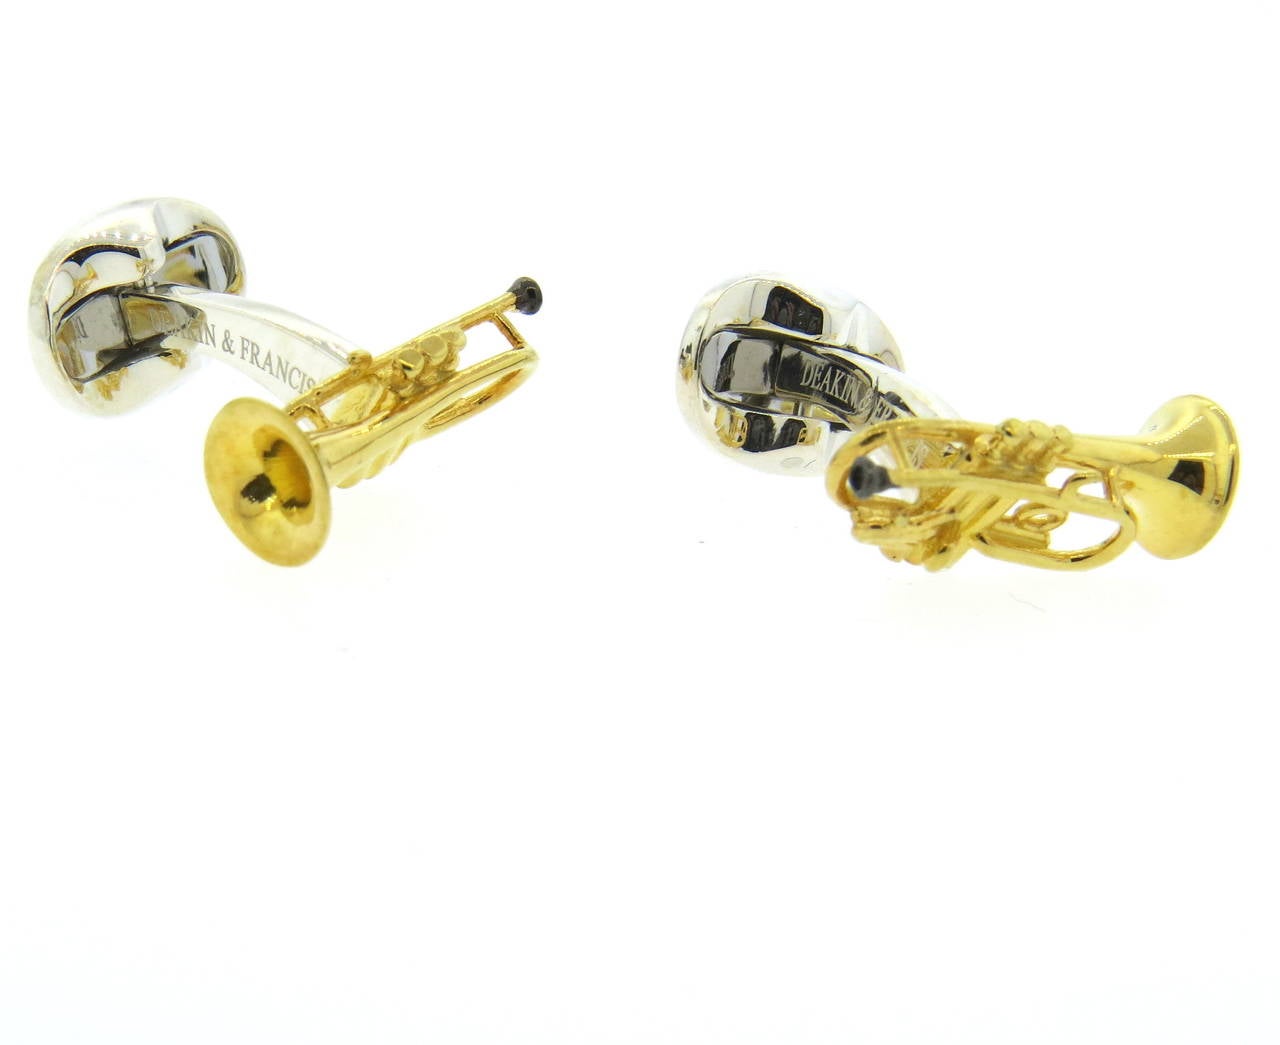 A pair of sterling silver cufflinks coated with gold enamel depicting trumpets.  Crafted by Deakin & Francis, the cufflinks measure 21mm x 10mm and weigh 12.8 grams.